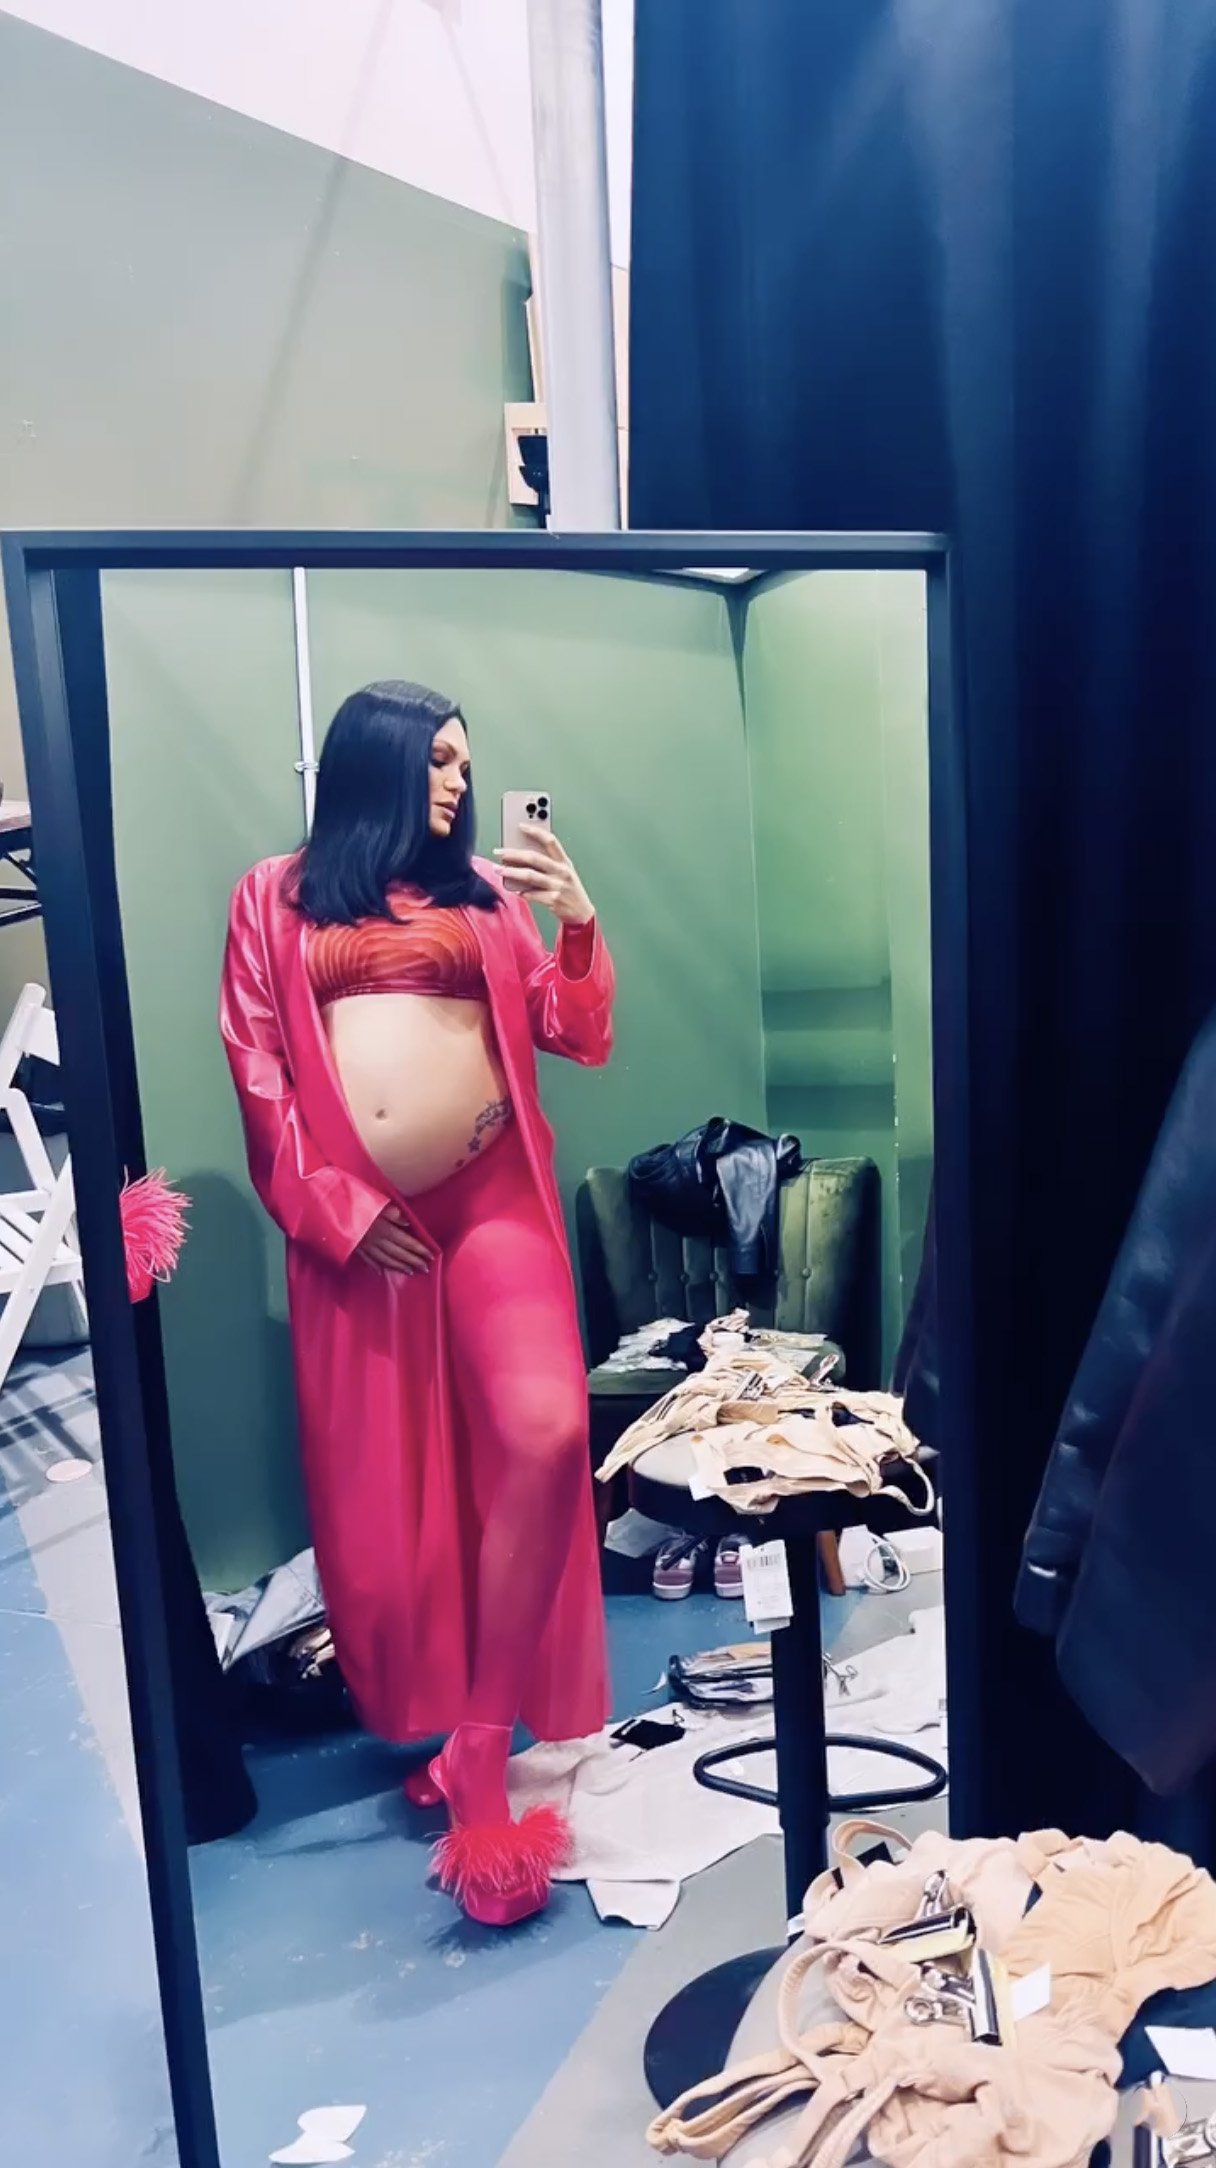 Jessie J shares a look at her growing baby bump during a photo shoot on Sunday, Feb. 5, 2023. The 34-year-old singer is expecting her first child.